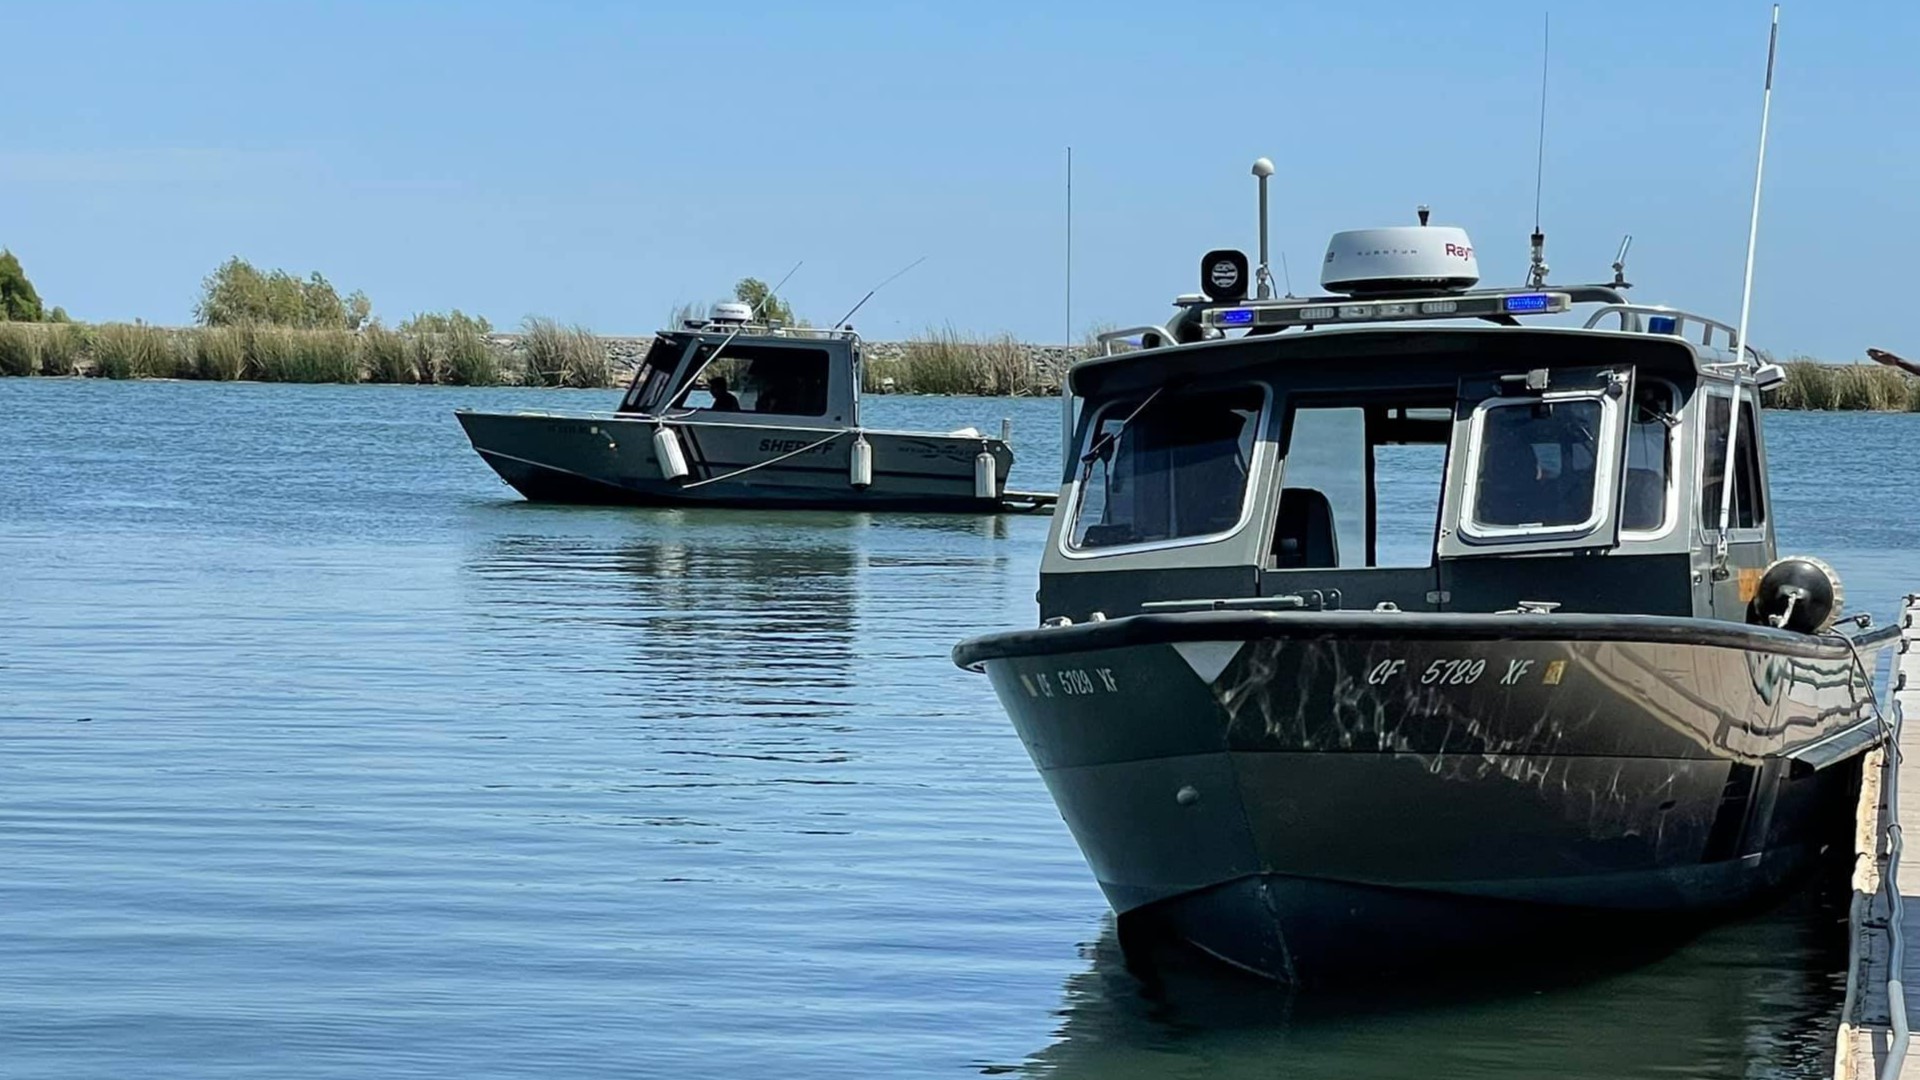 A multi-agency search for a person who fell into the Delta without a life jacket was suspended until Monday morning, Sacramento County Sheriff's Office said.